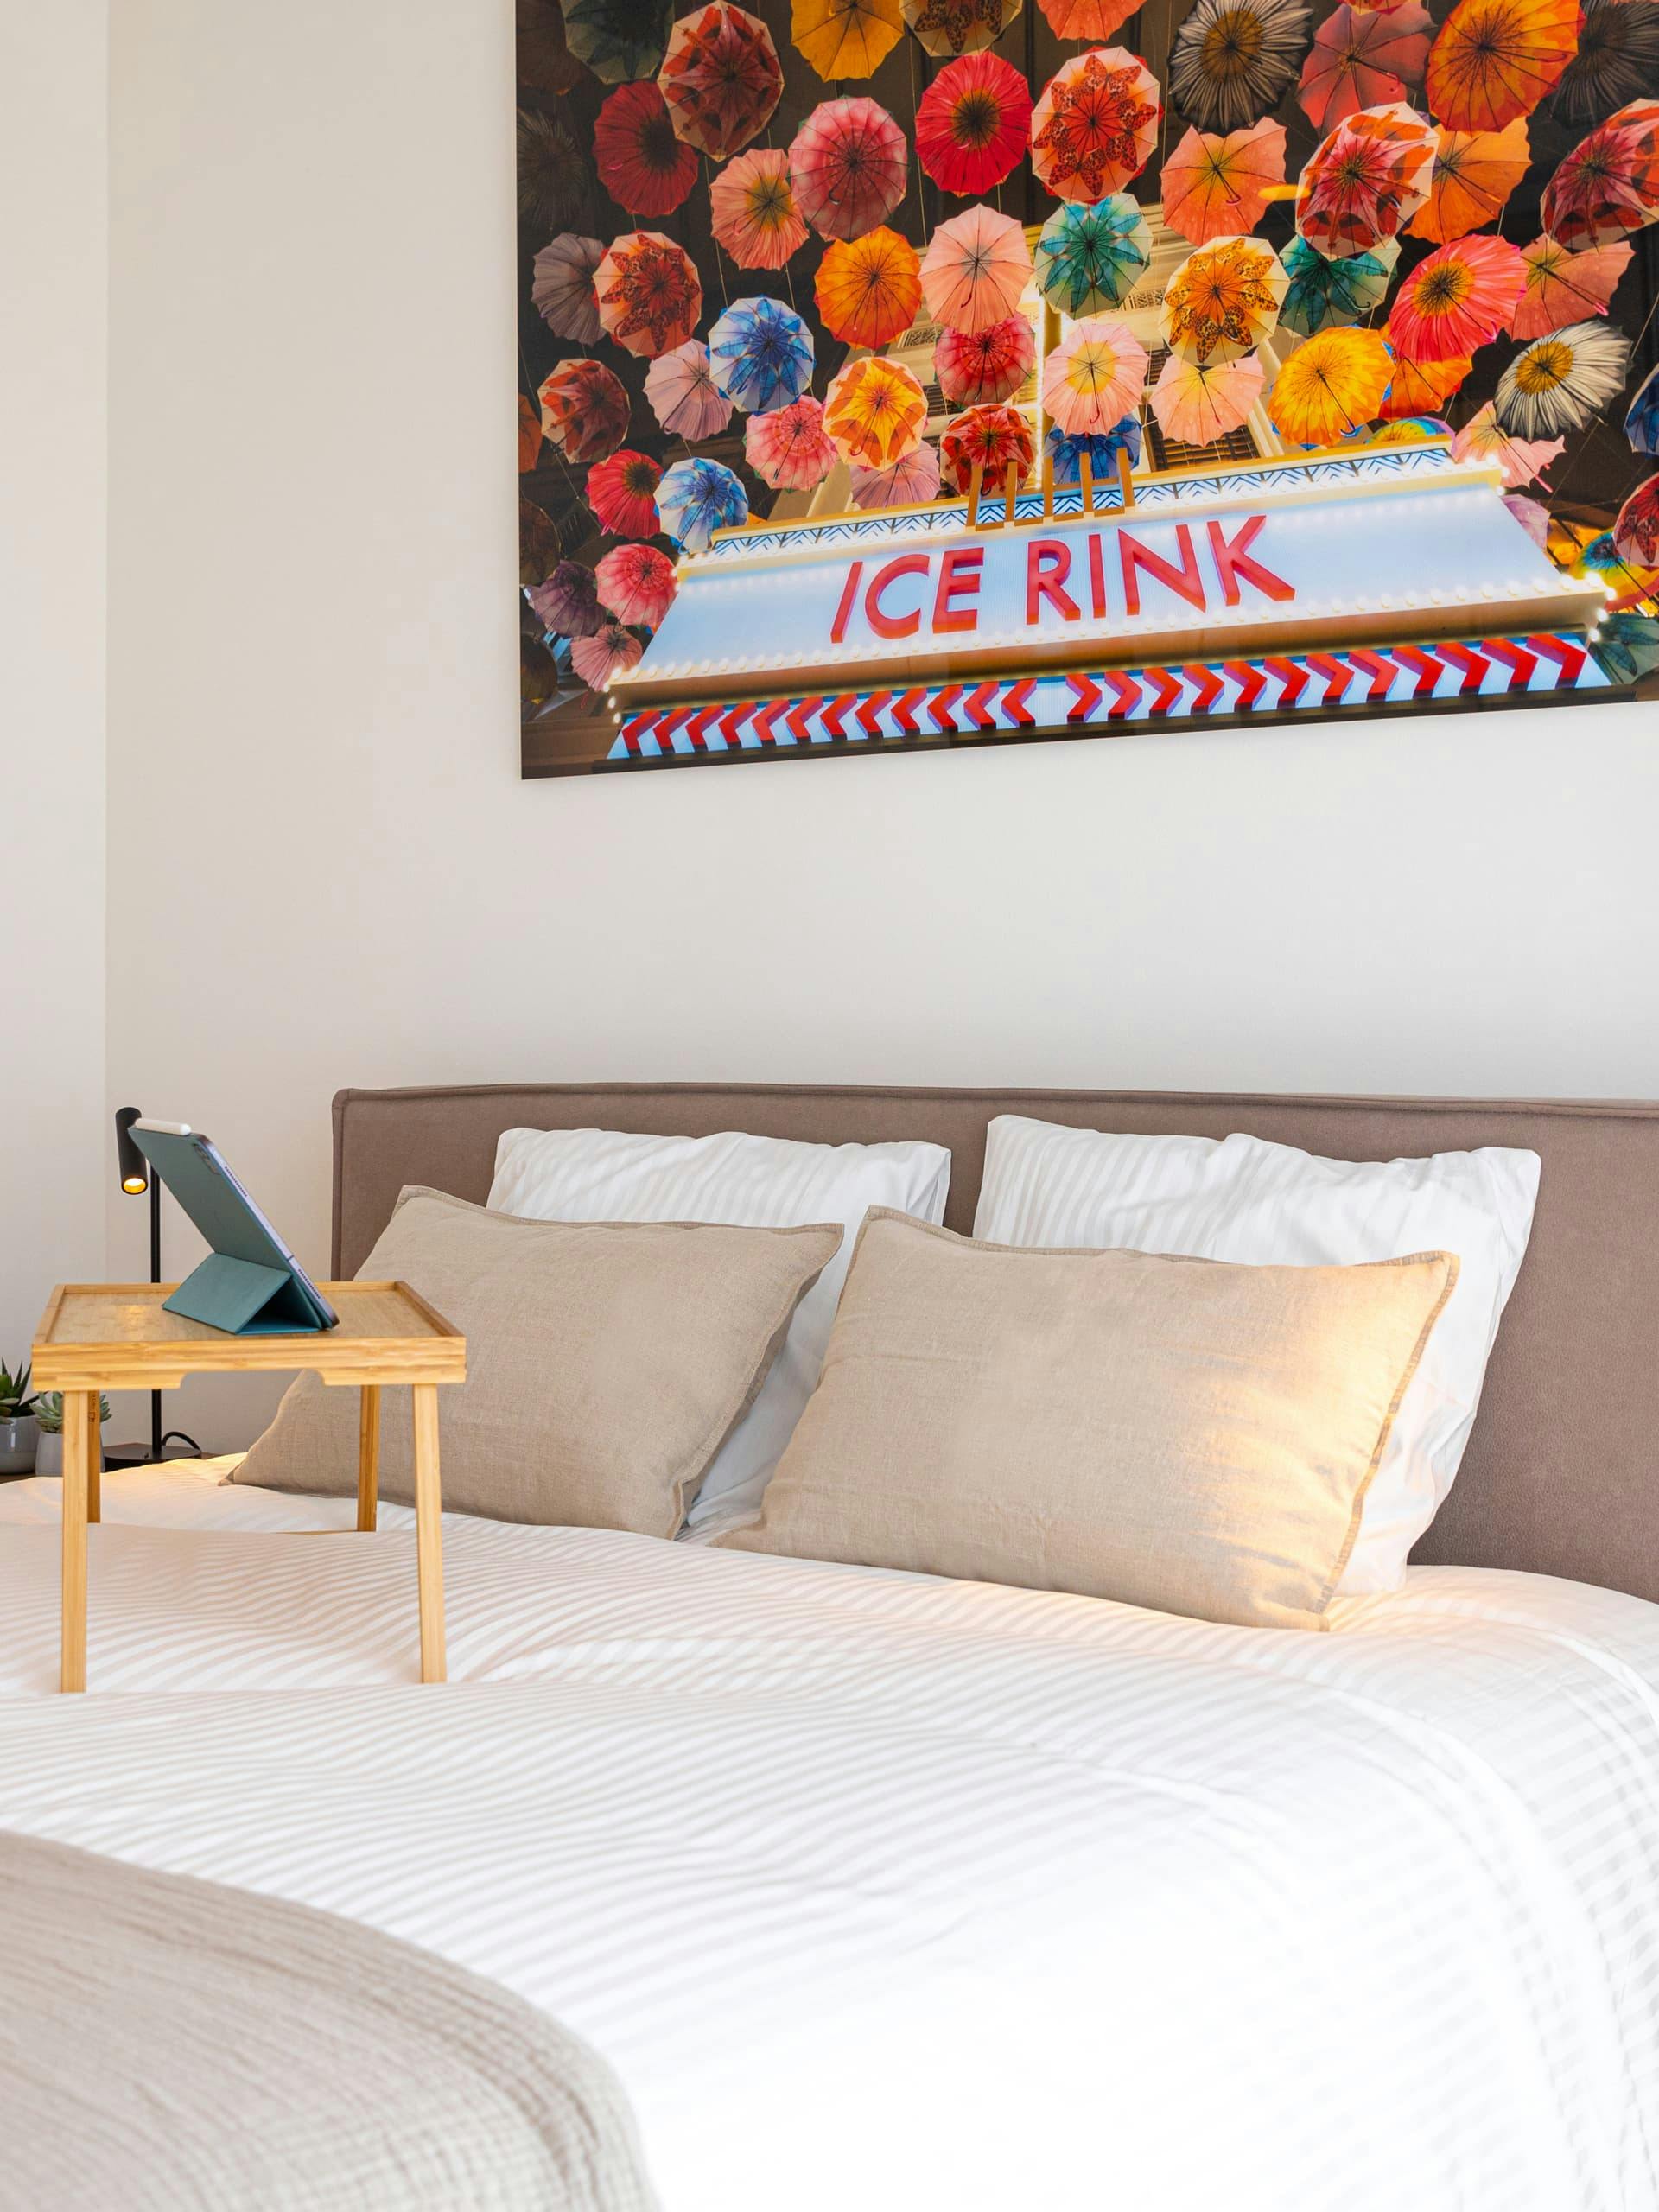 View of a bed, sitting on top there is a tray with legs and an ipad on its stand. above the bed there is a photograph of flowers and the words Ice Rink.